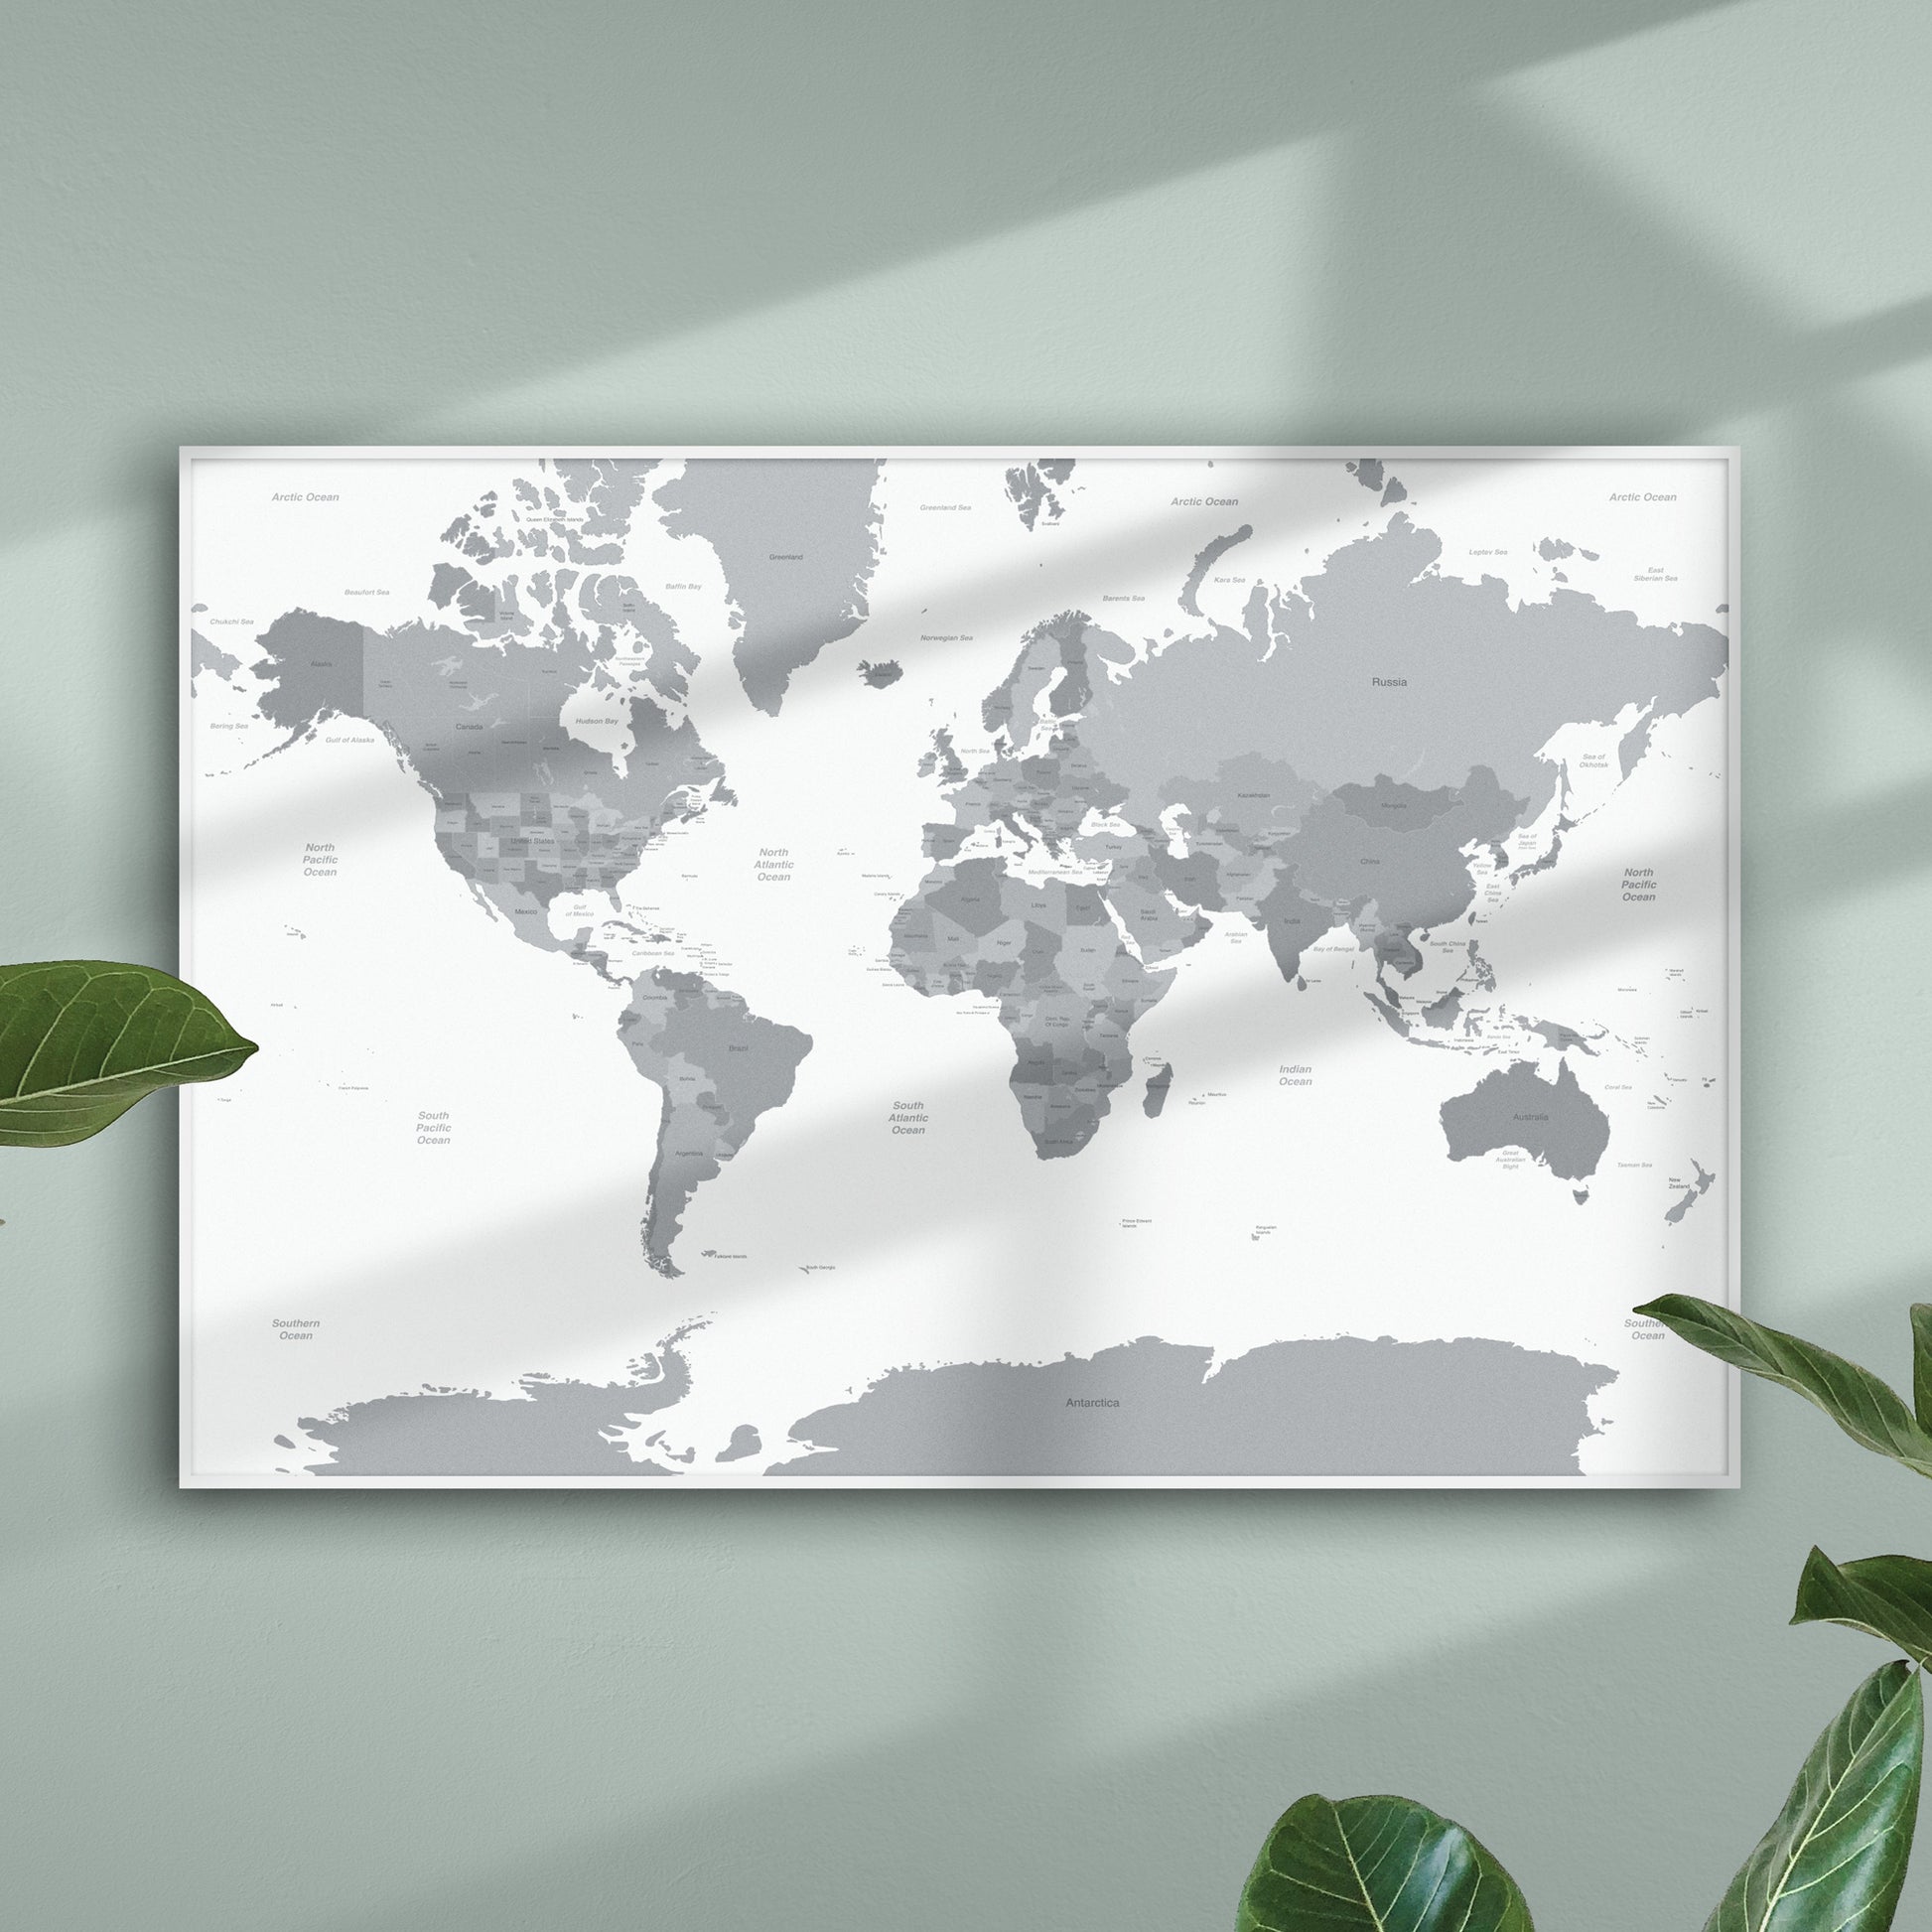 Grey Countries and White Sea Map of the World on Pale Green Wall with Shadows